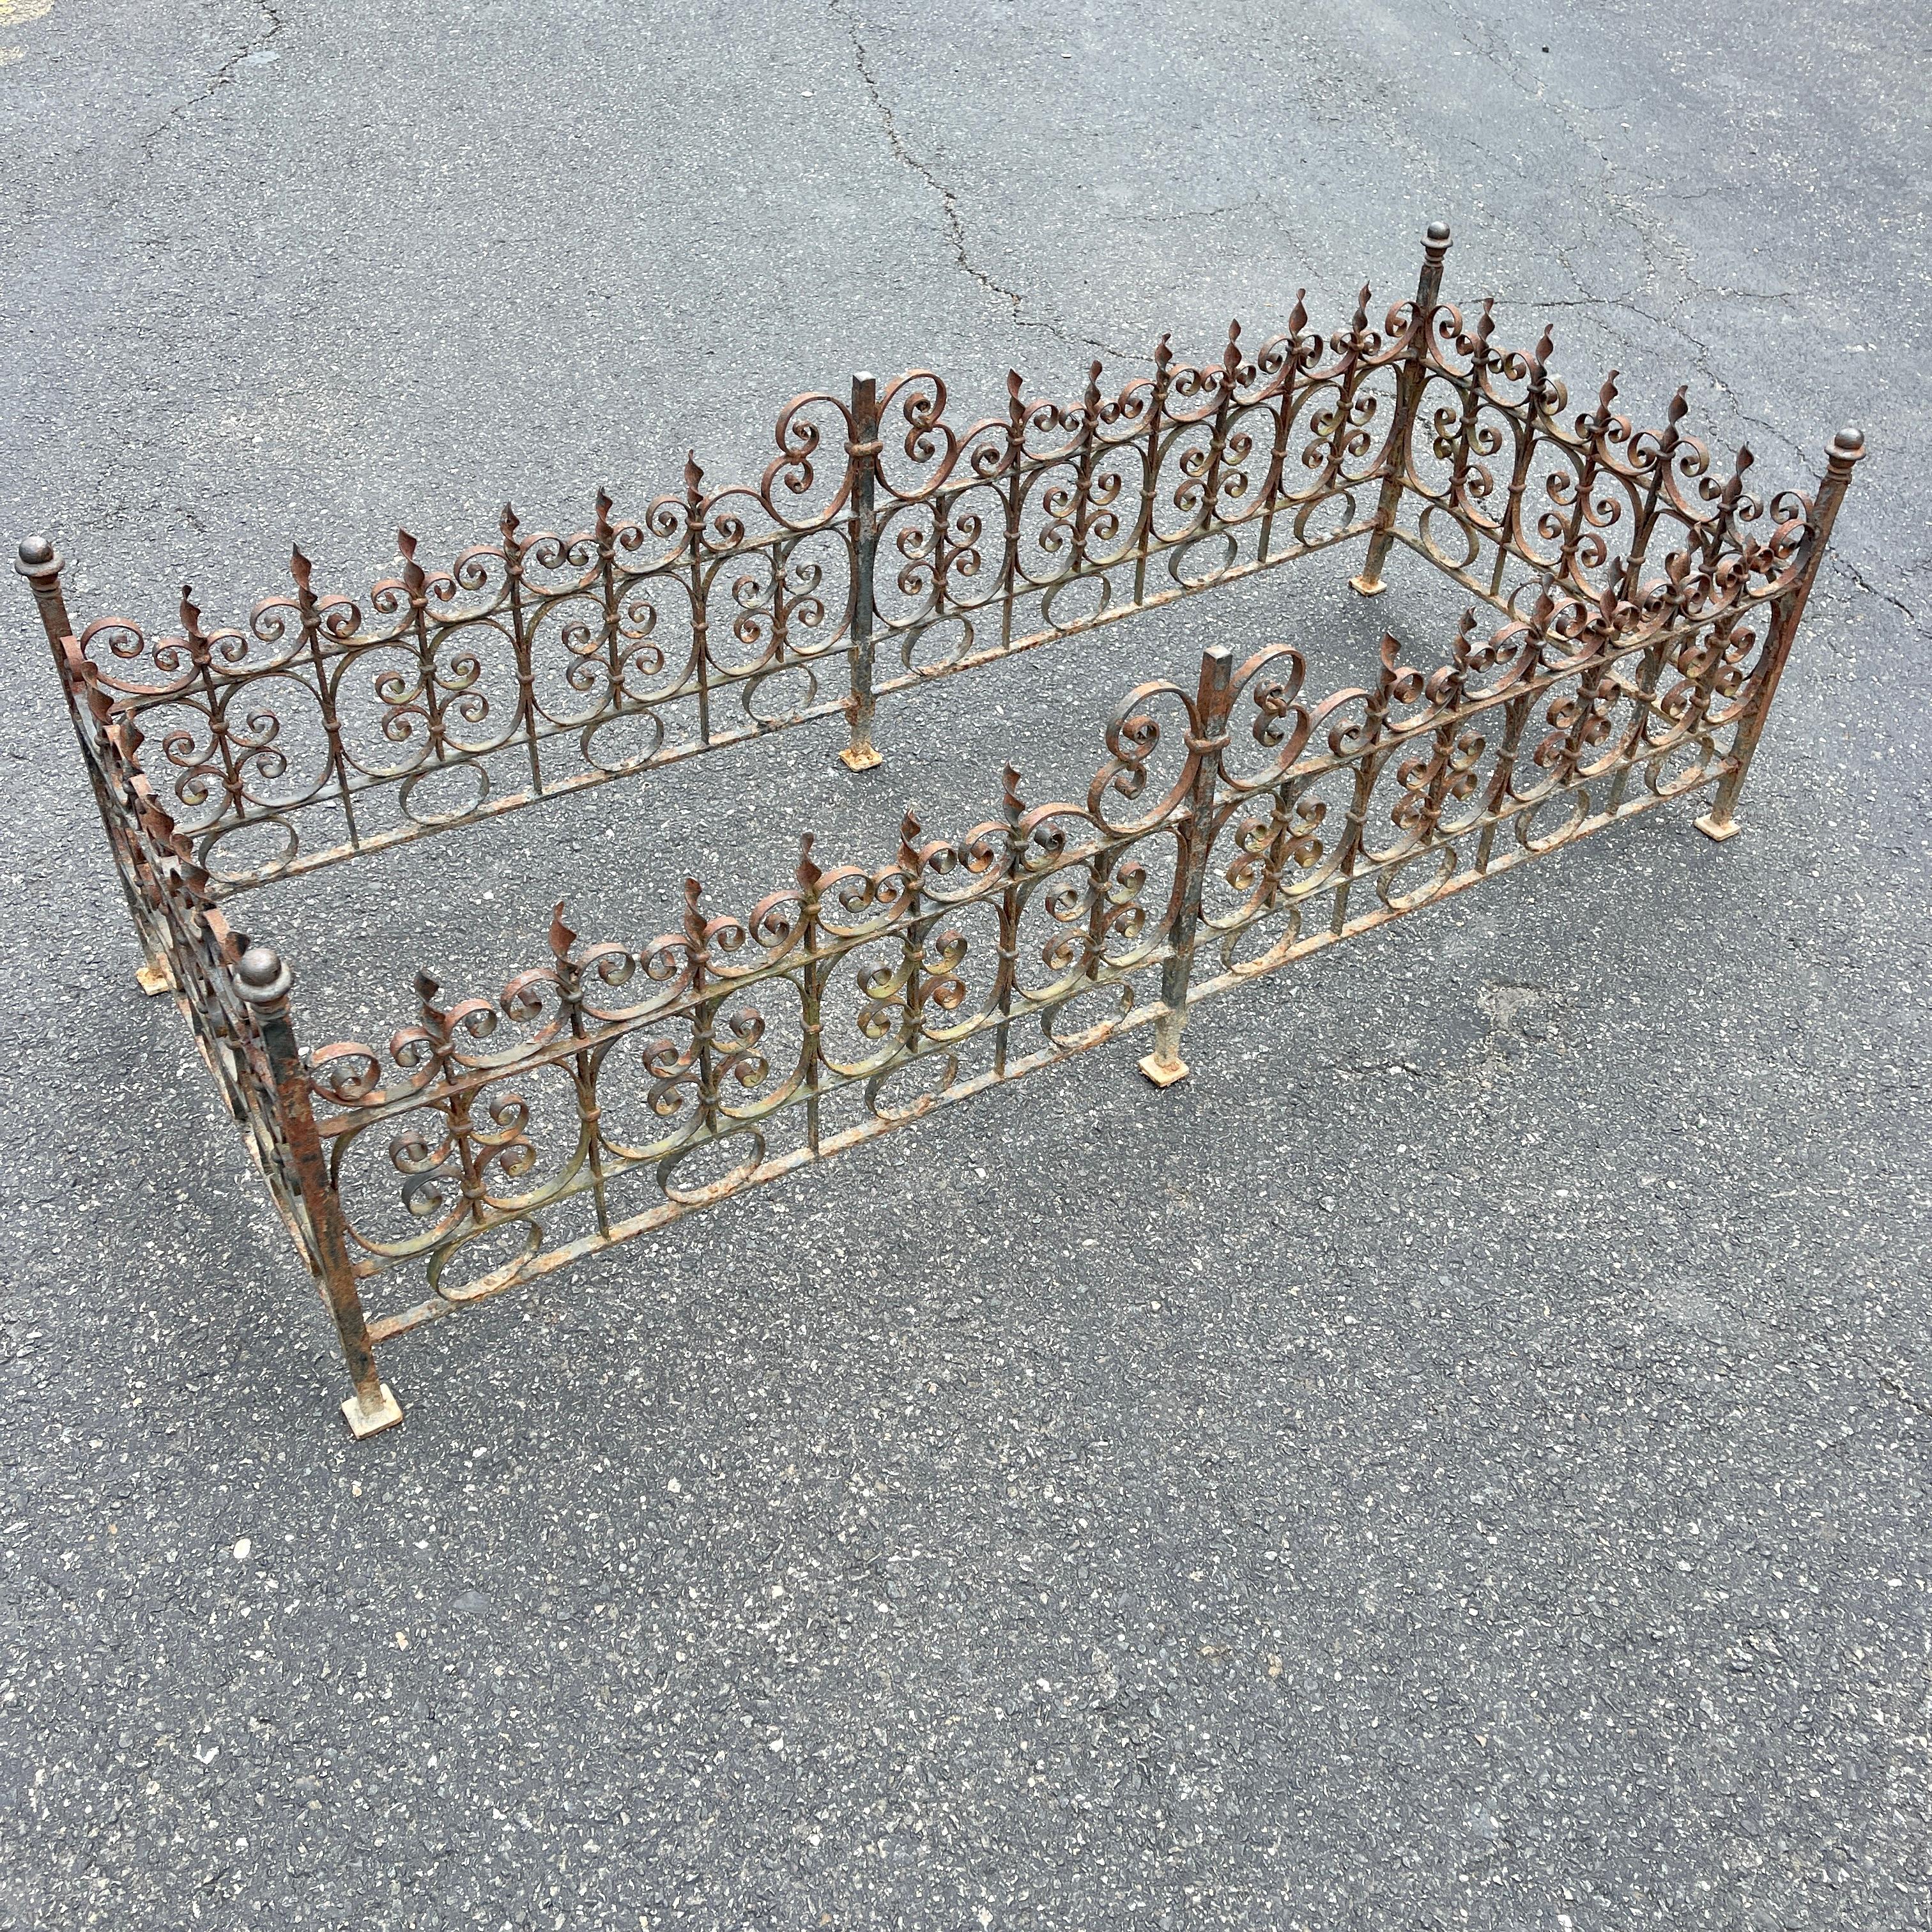 Early 20th Century Rectangular Wrought Iron Patio Cocktail Table Base and Fence